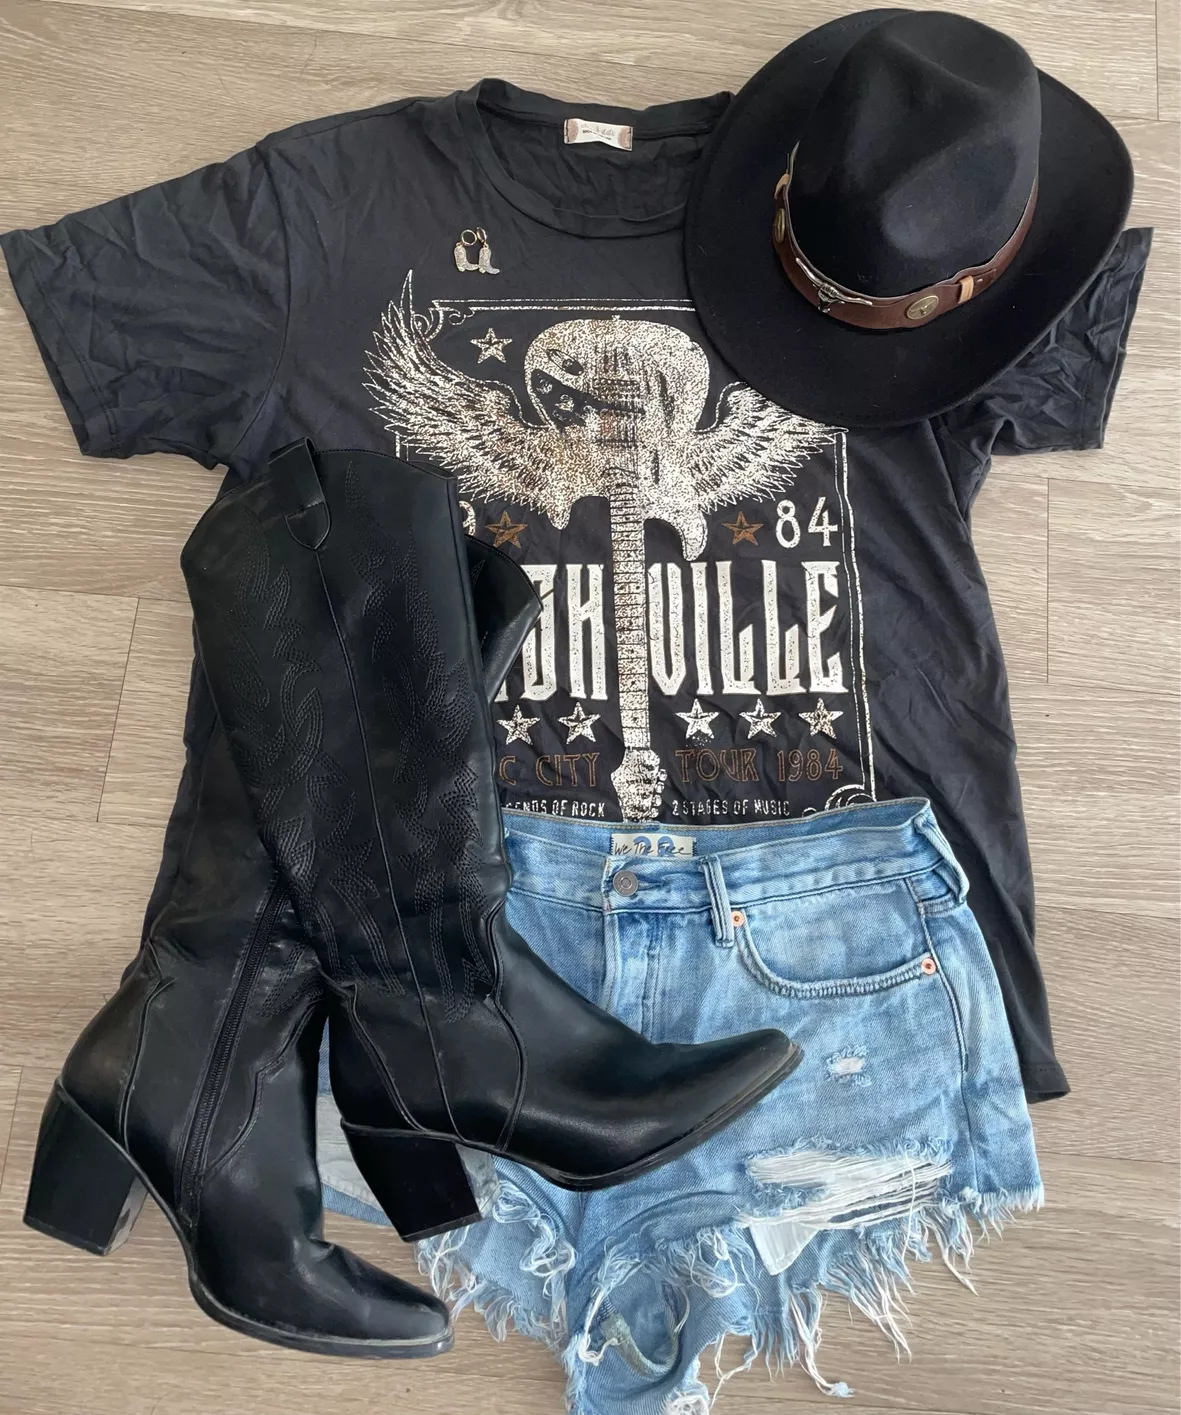 high waisted jeans outfit with cowboy boots and black turtleneck  Country  style outfits, Cowboy boot outfits, High waisted jeans outfit